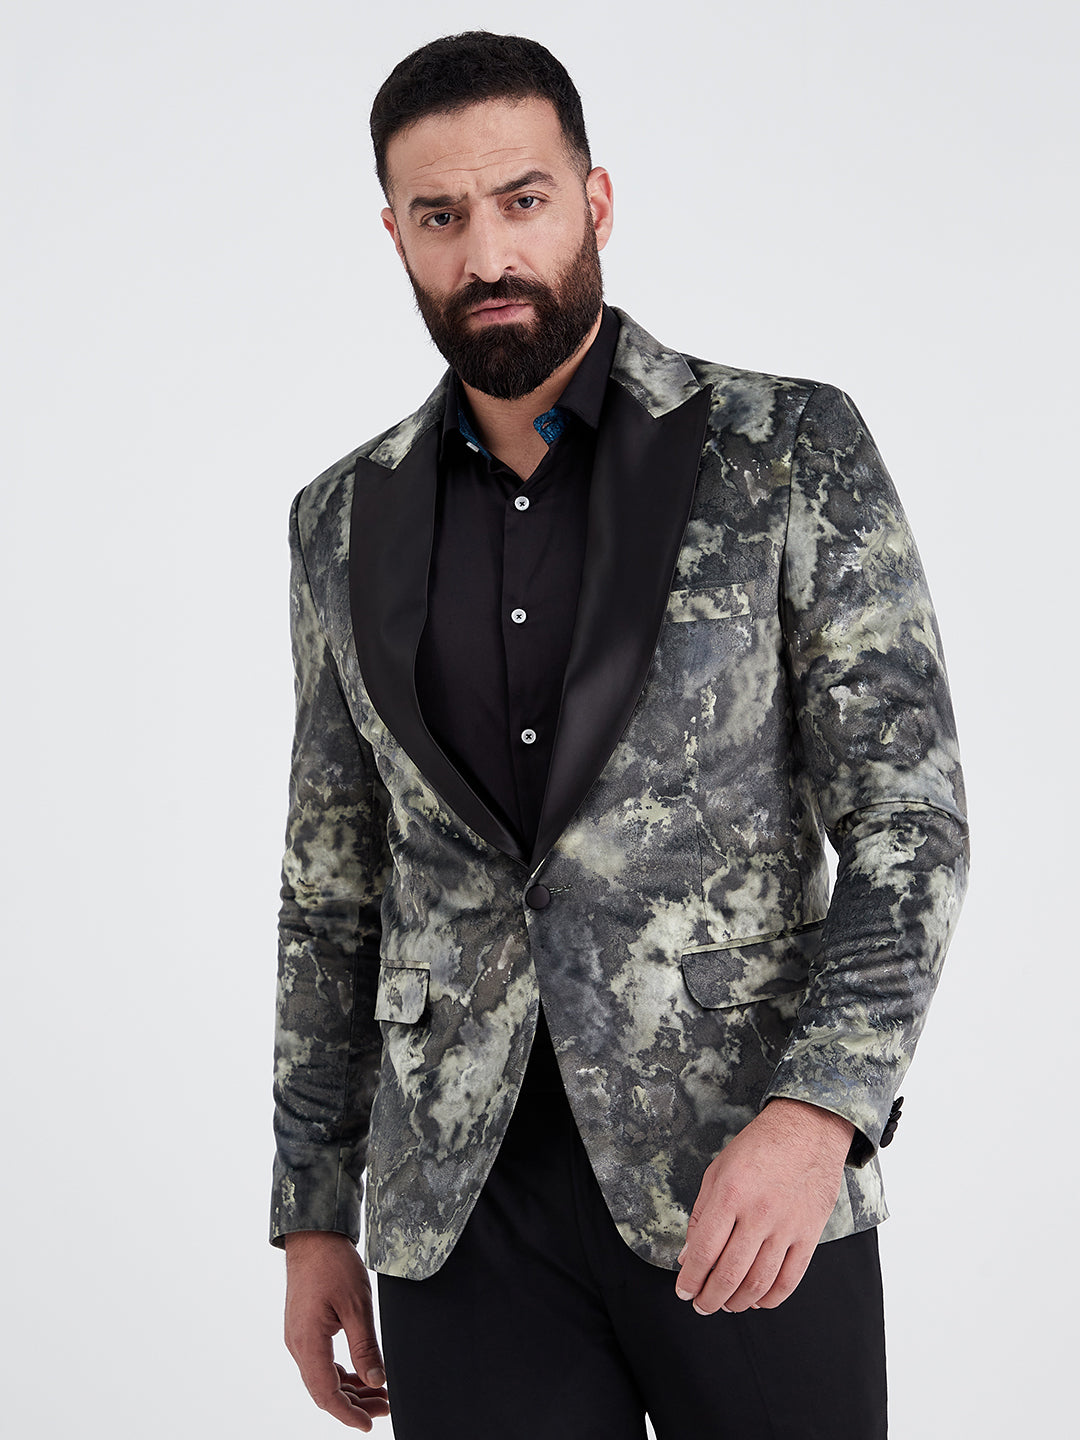 Blazer For Men In India By MR BUTTON